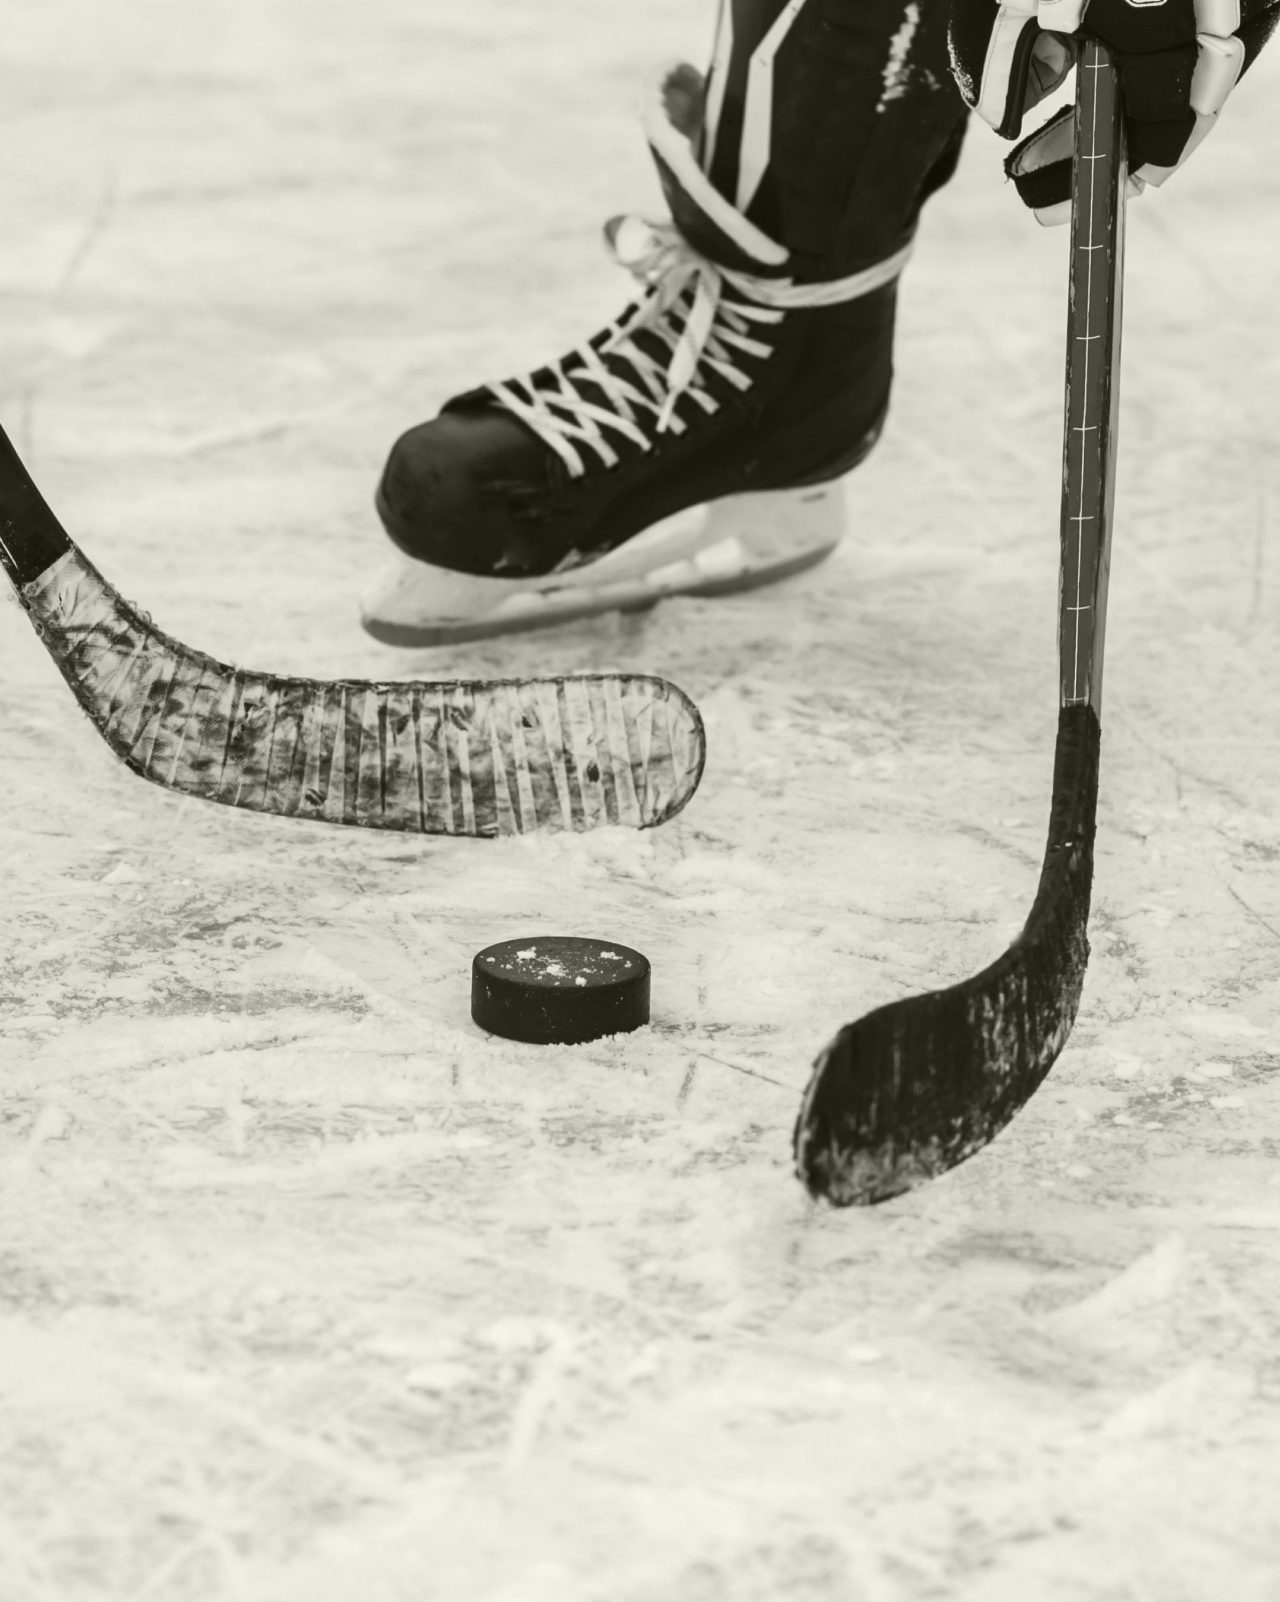 Black and white closeup of two hockey sticks going after hockey puck